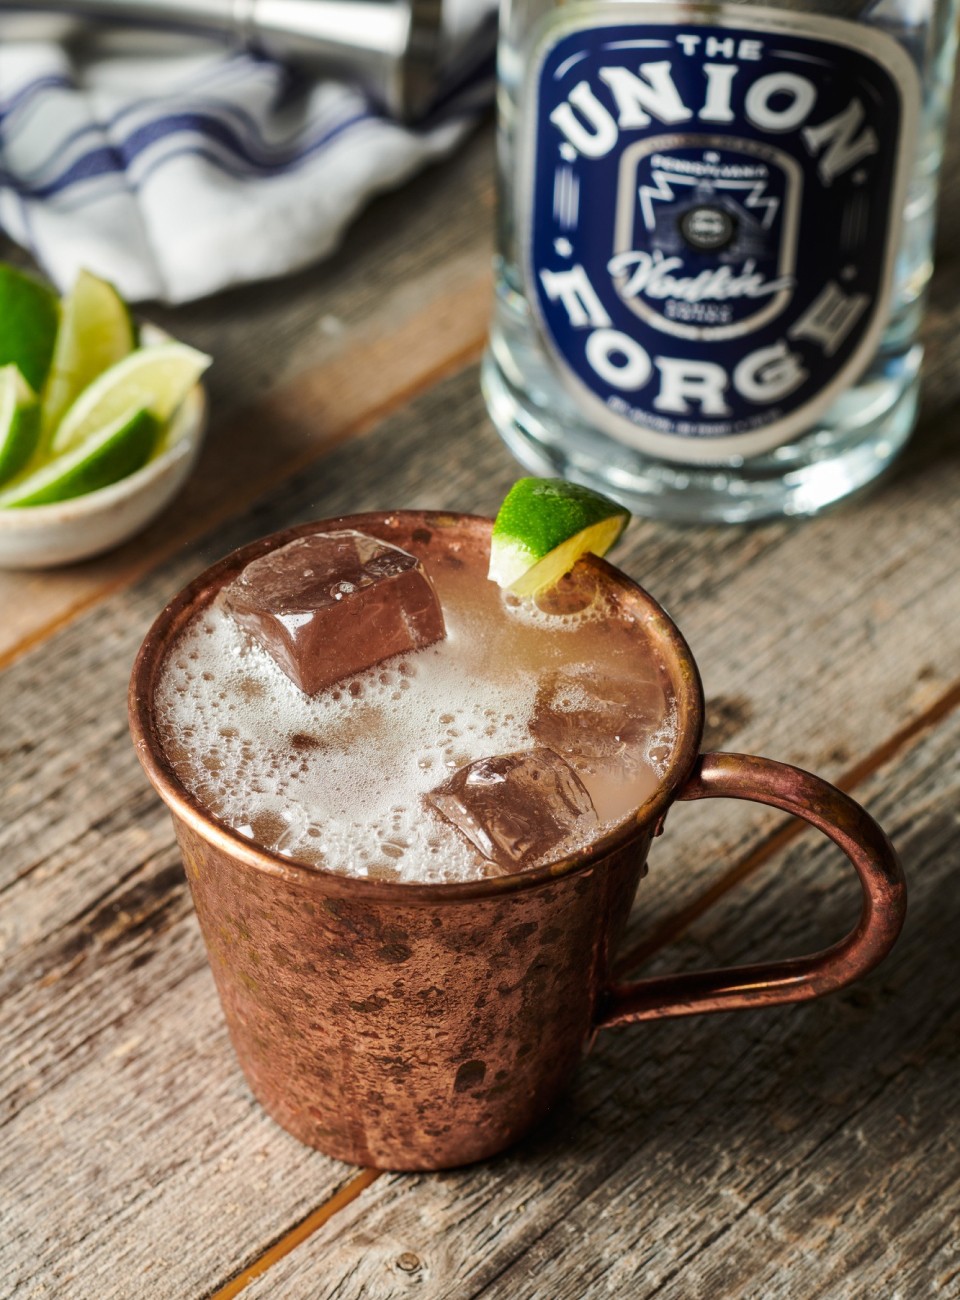 A cup of Union Forge Pennsylvania Mule